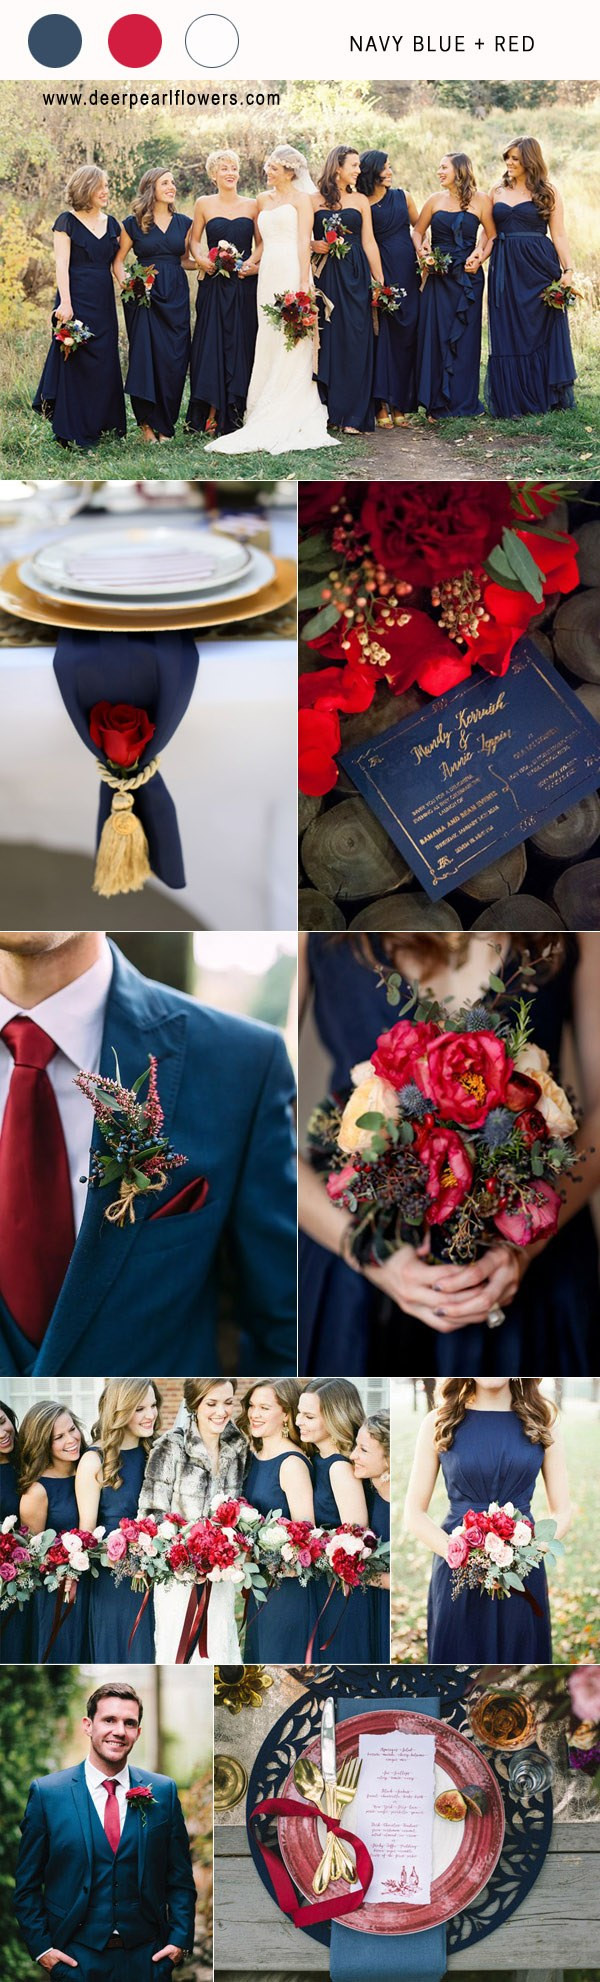 Blue And Red Wedding Colors
 Top 10 Navy Blue Wedding Color bo Ideas for 2018